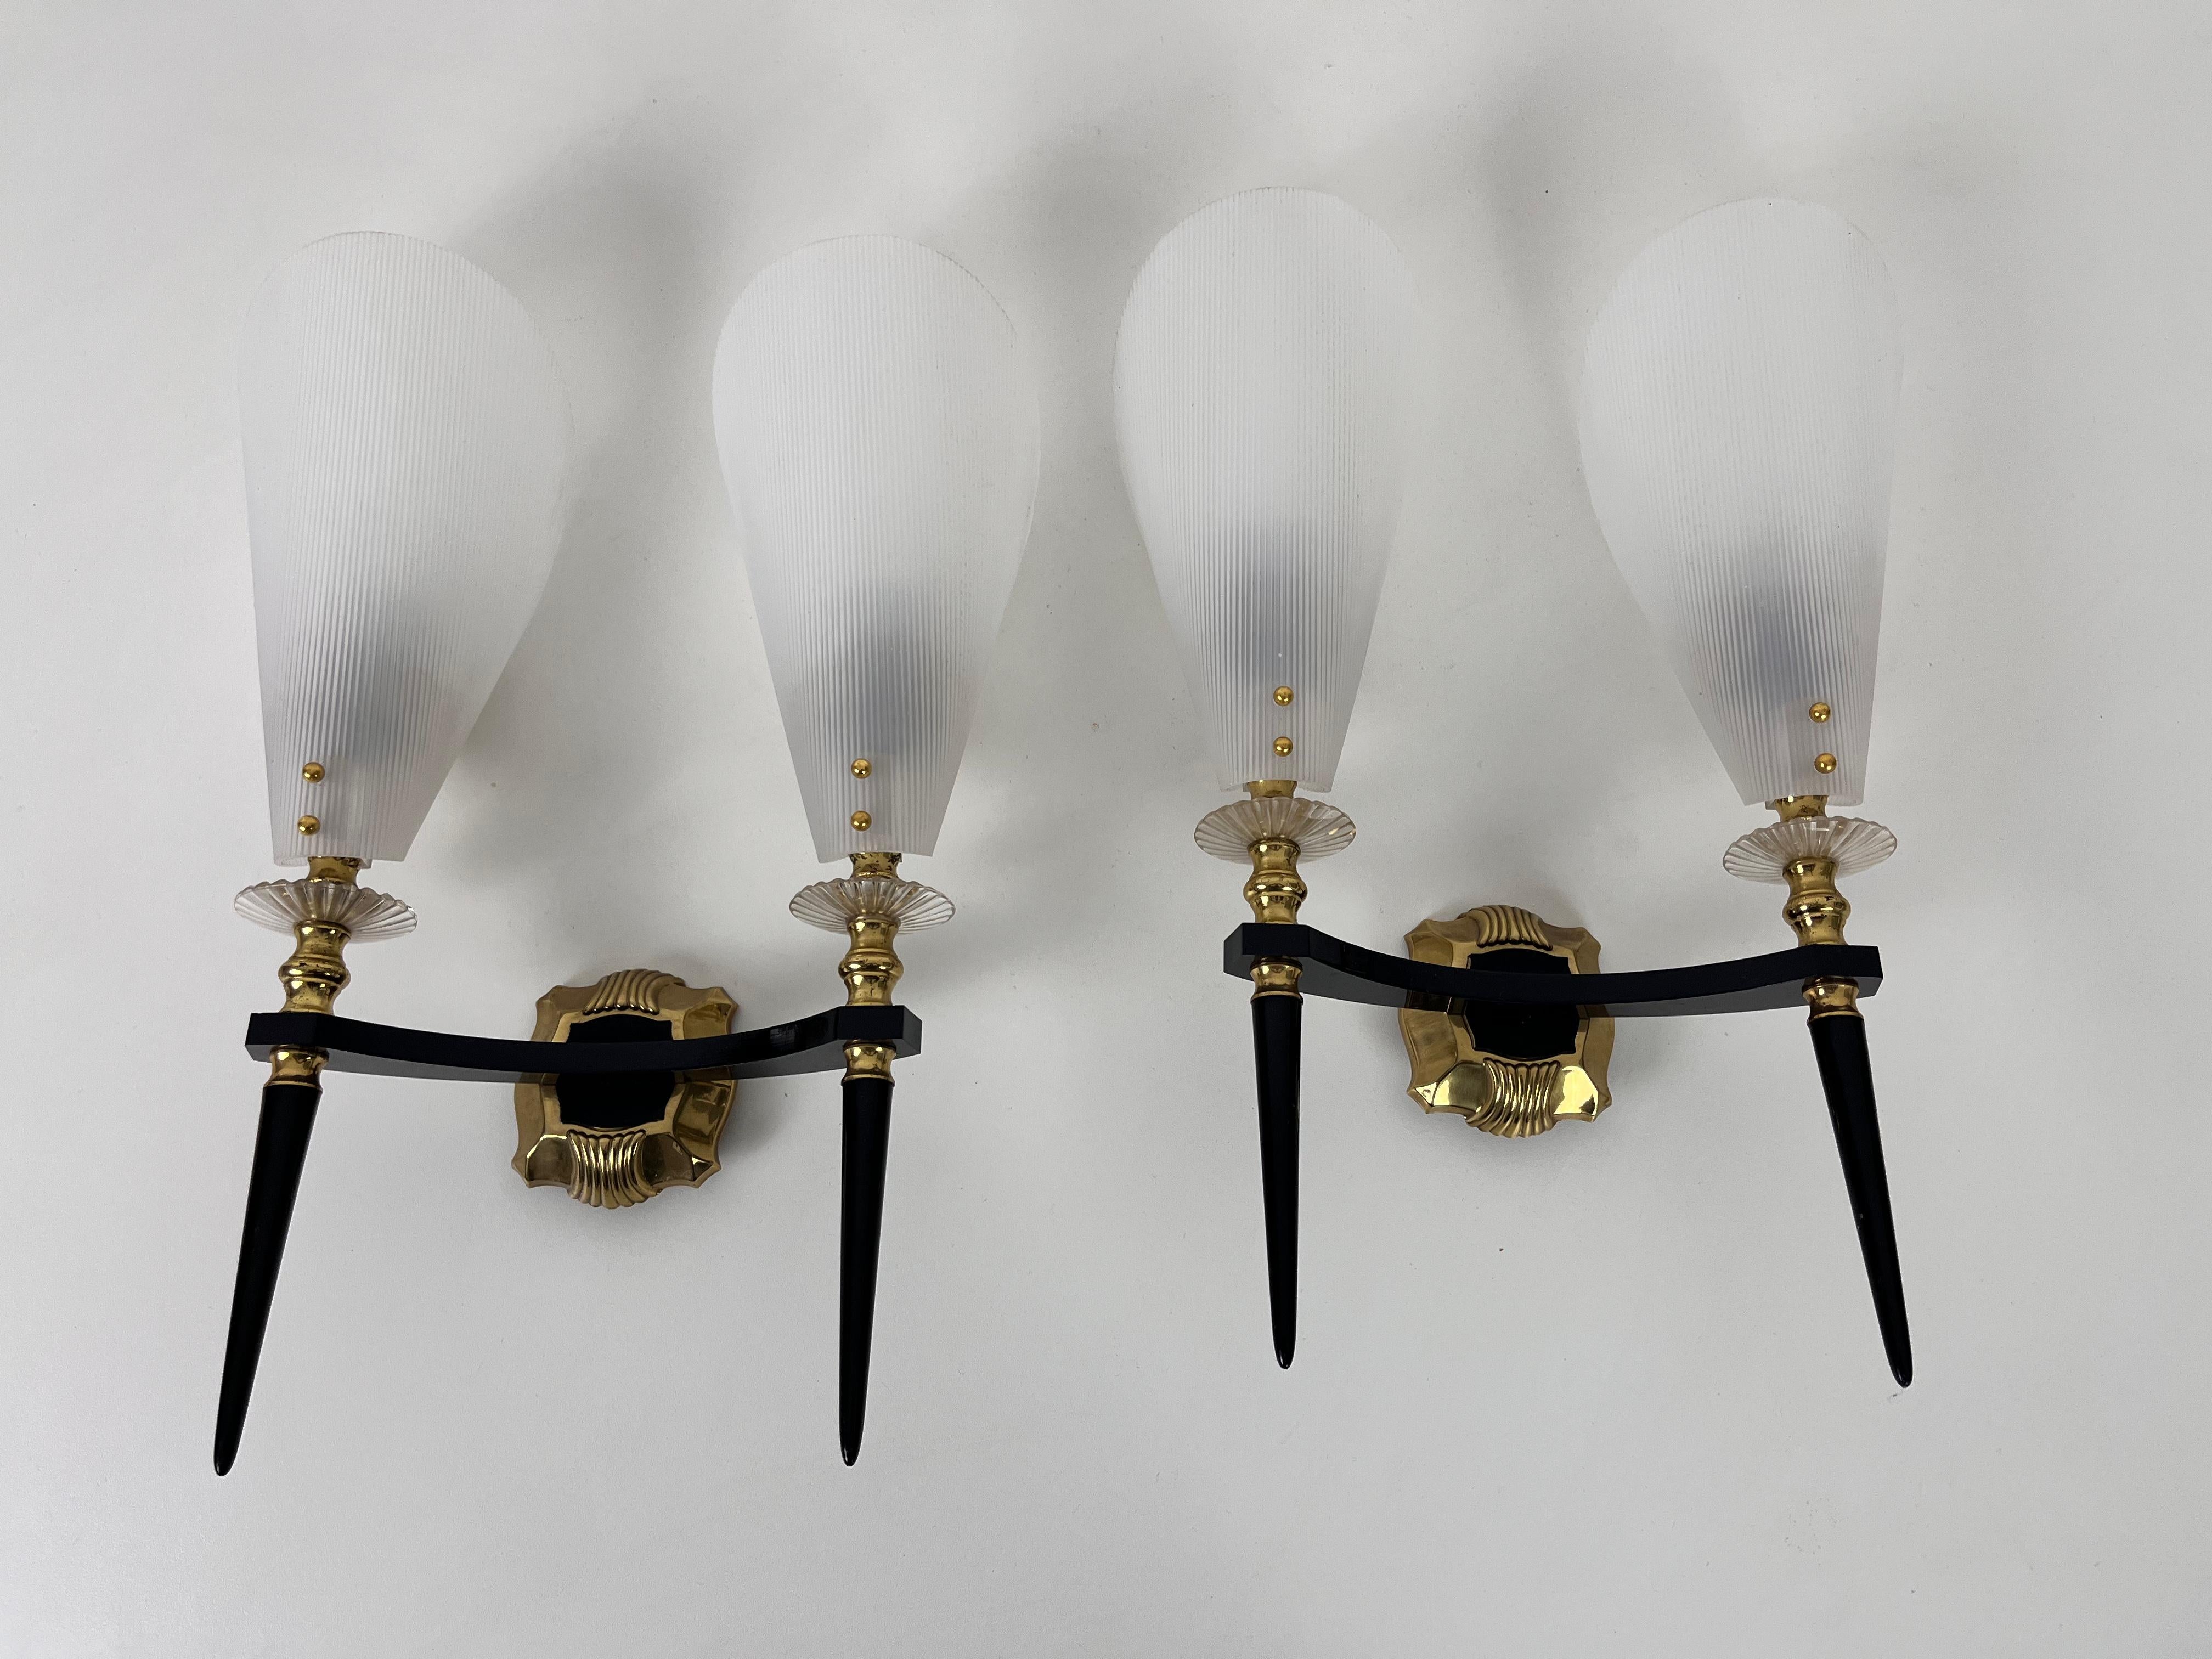 Maison Arlus sconces made in France in the 1960s. The body is made of plastic with beautiful brass ornaments. The shades are plexi glass.

Works with both 120/220V. Good vintage condition. 

Free worldwide express shipping.